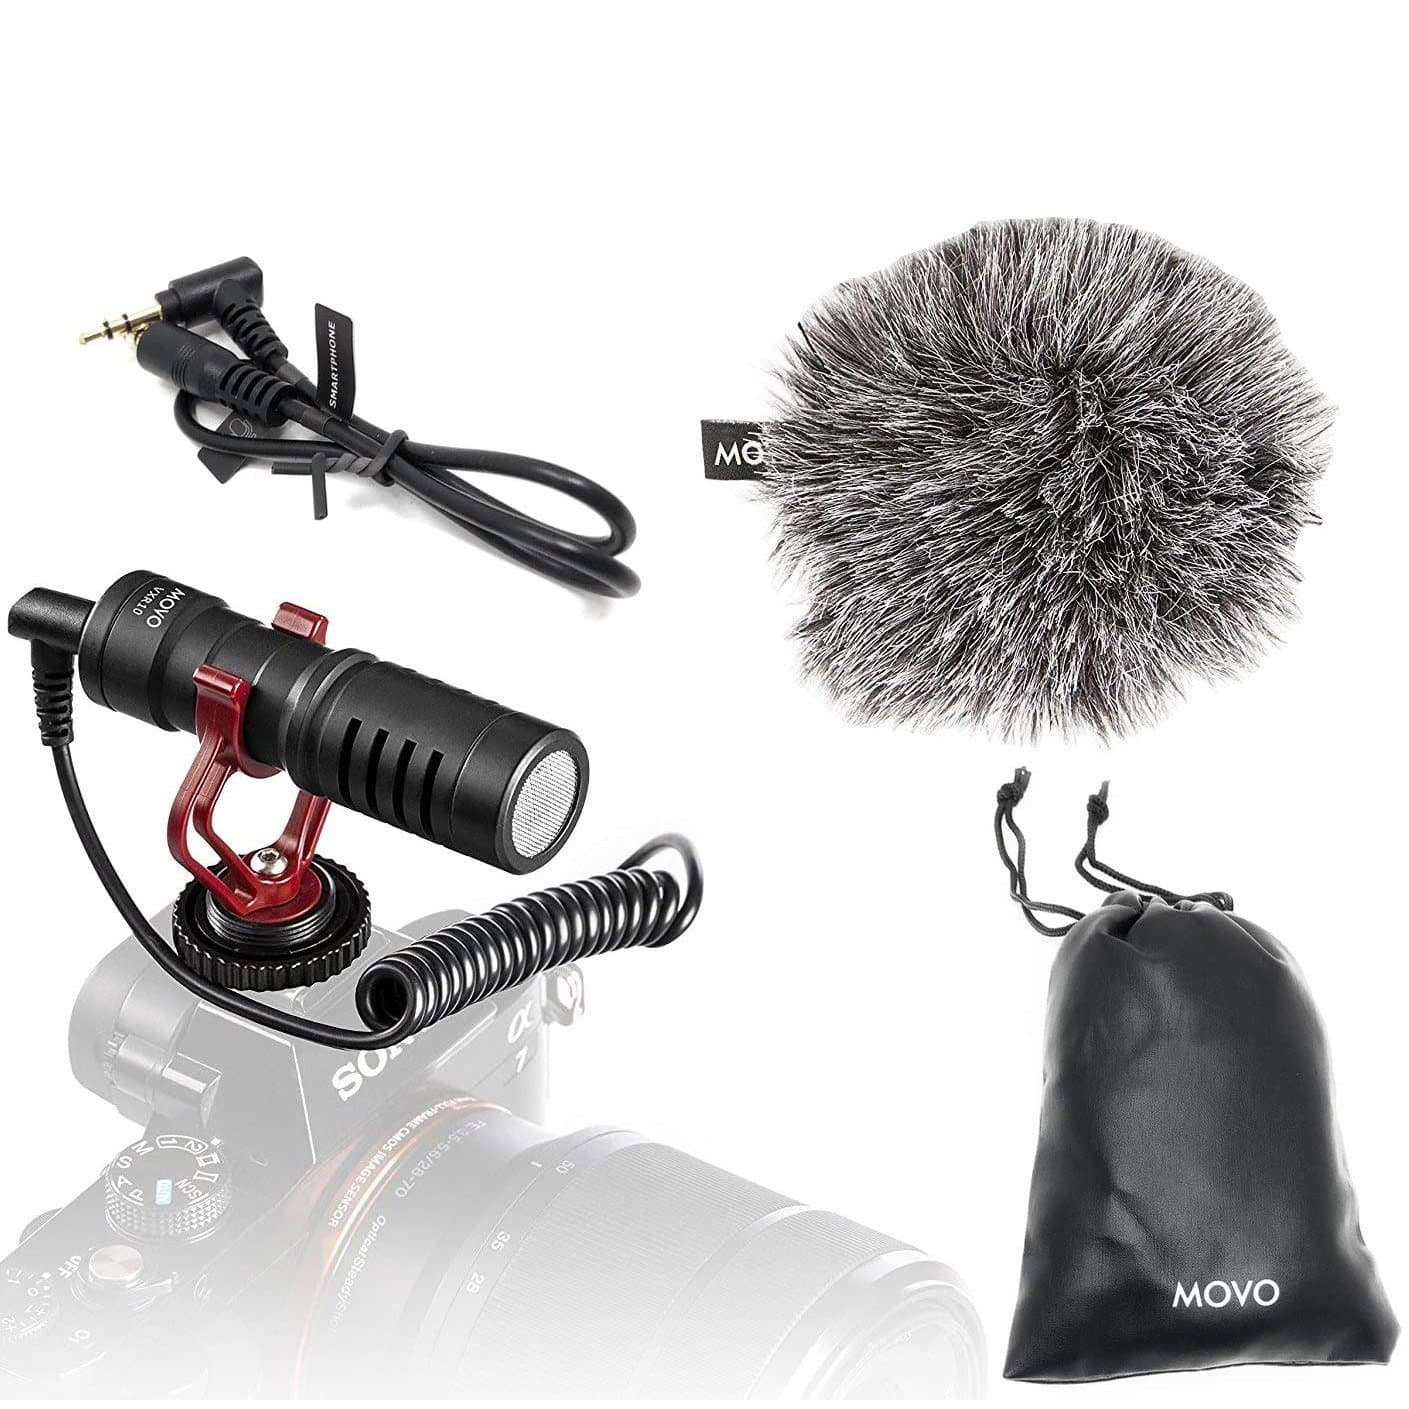 Movo VXR10 | Universal Microphone for Video Recording Mic